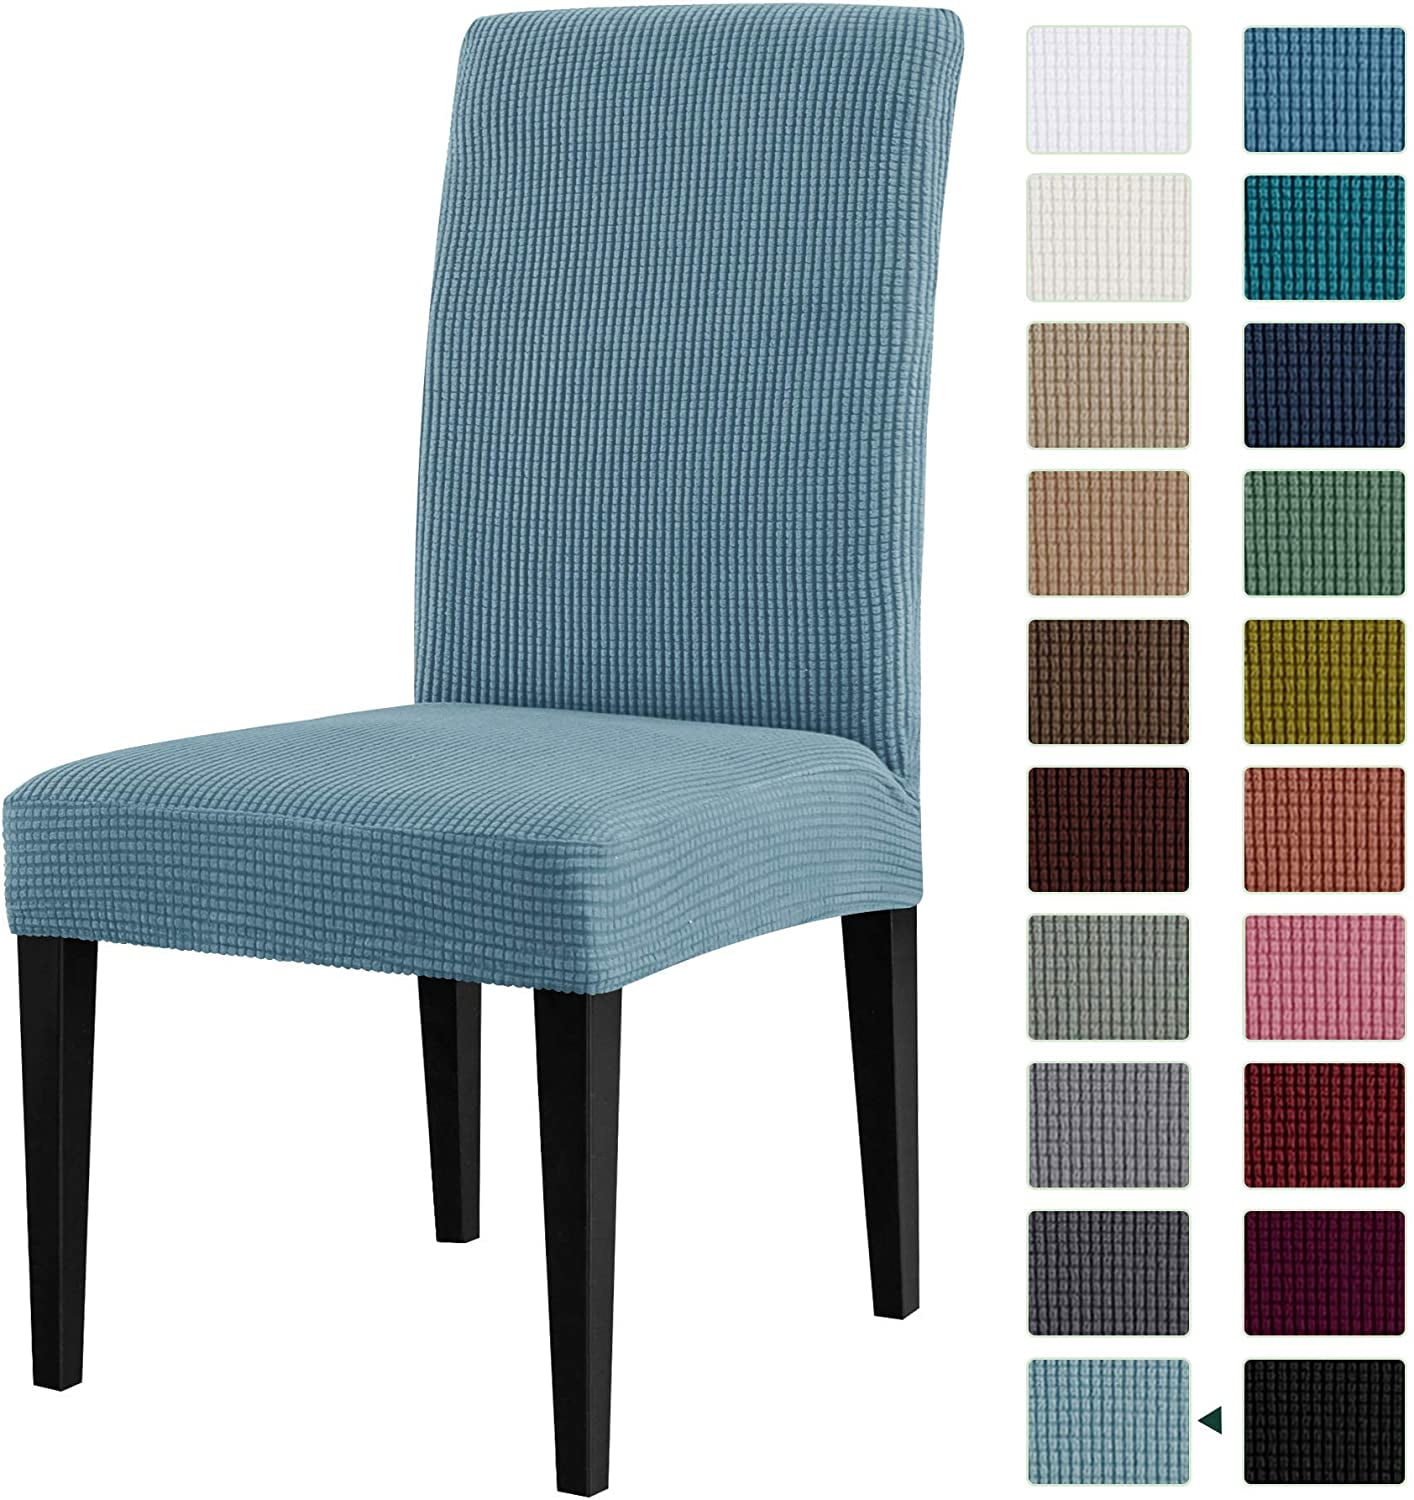 Details about   NICEEC Easy Fitted Dining Chair Covers Slipcovers Polyester Stretch Removable Wa 